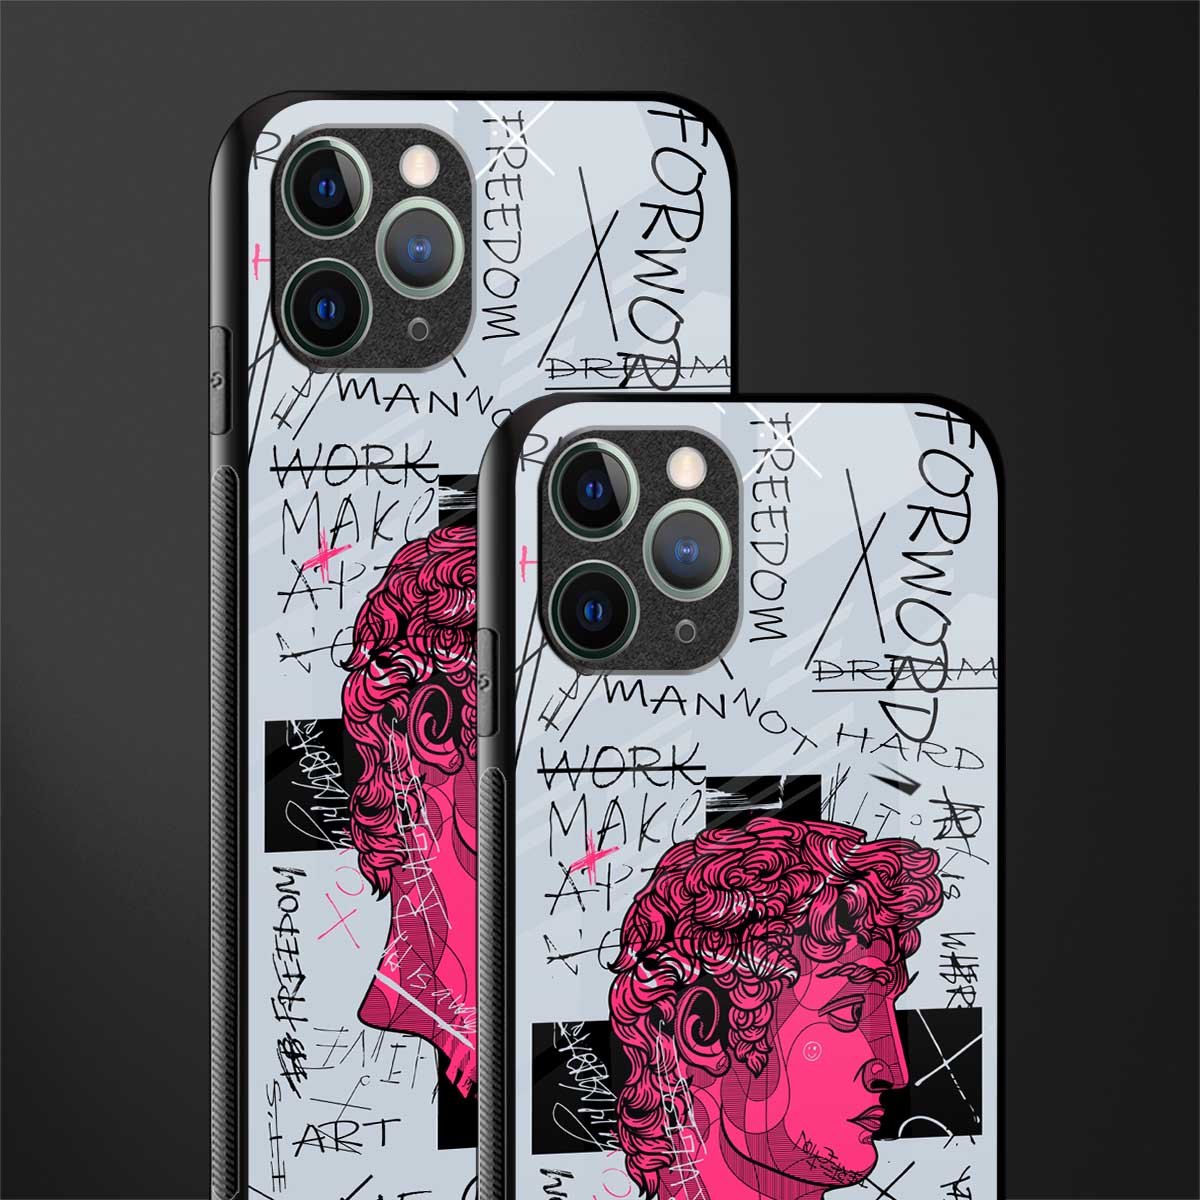 lost in reality david glass case for iphone 11 pro max image-2